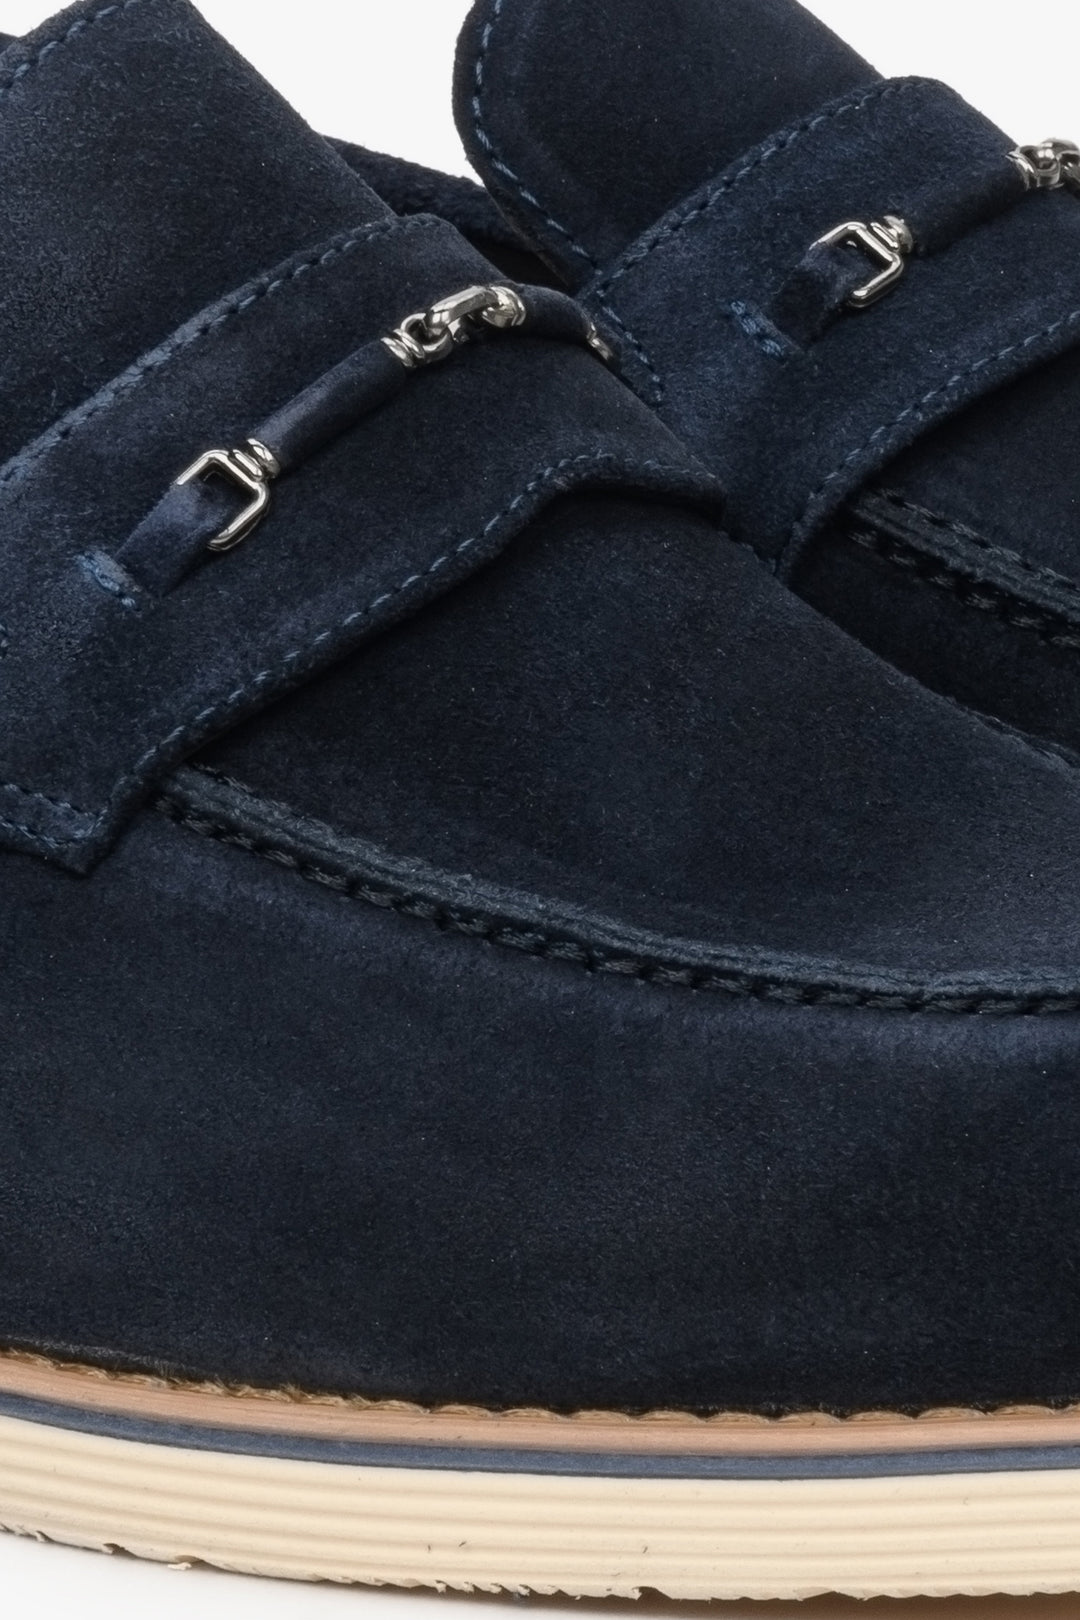 Men's navy blue velour loafers - close-up on the details.